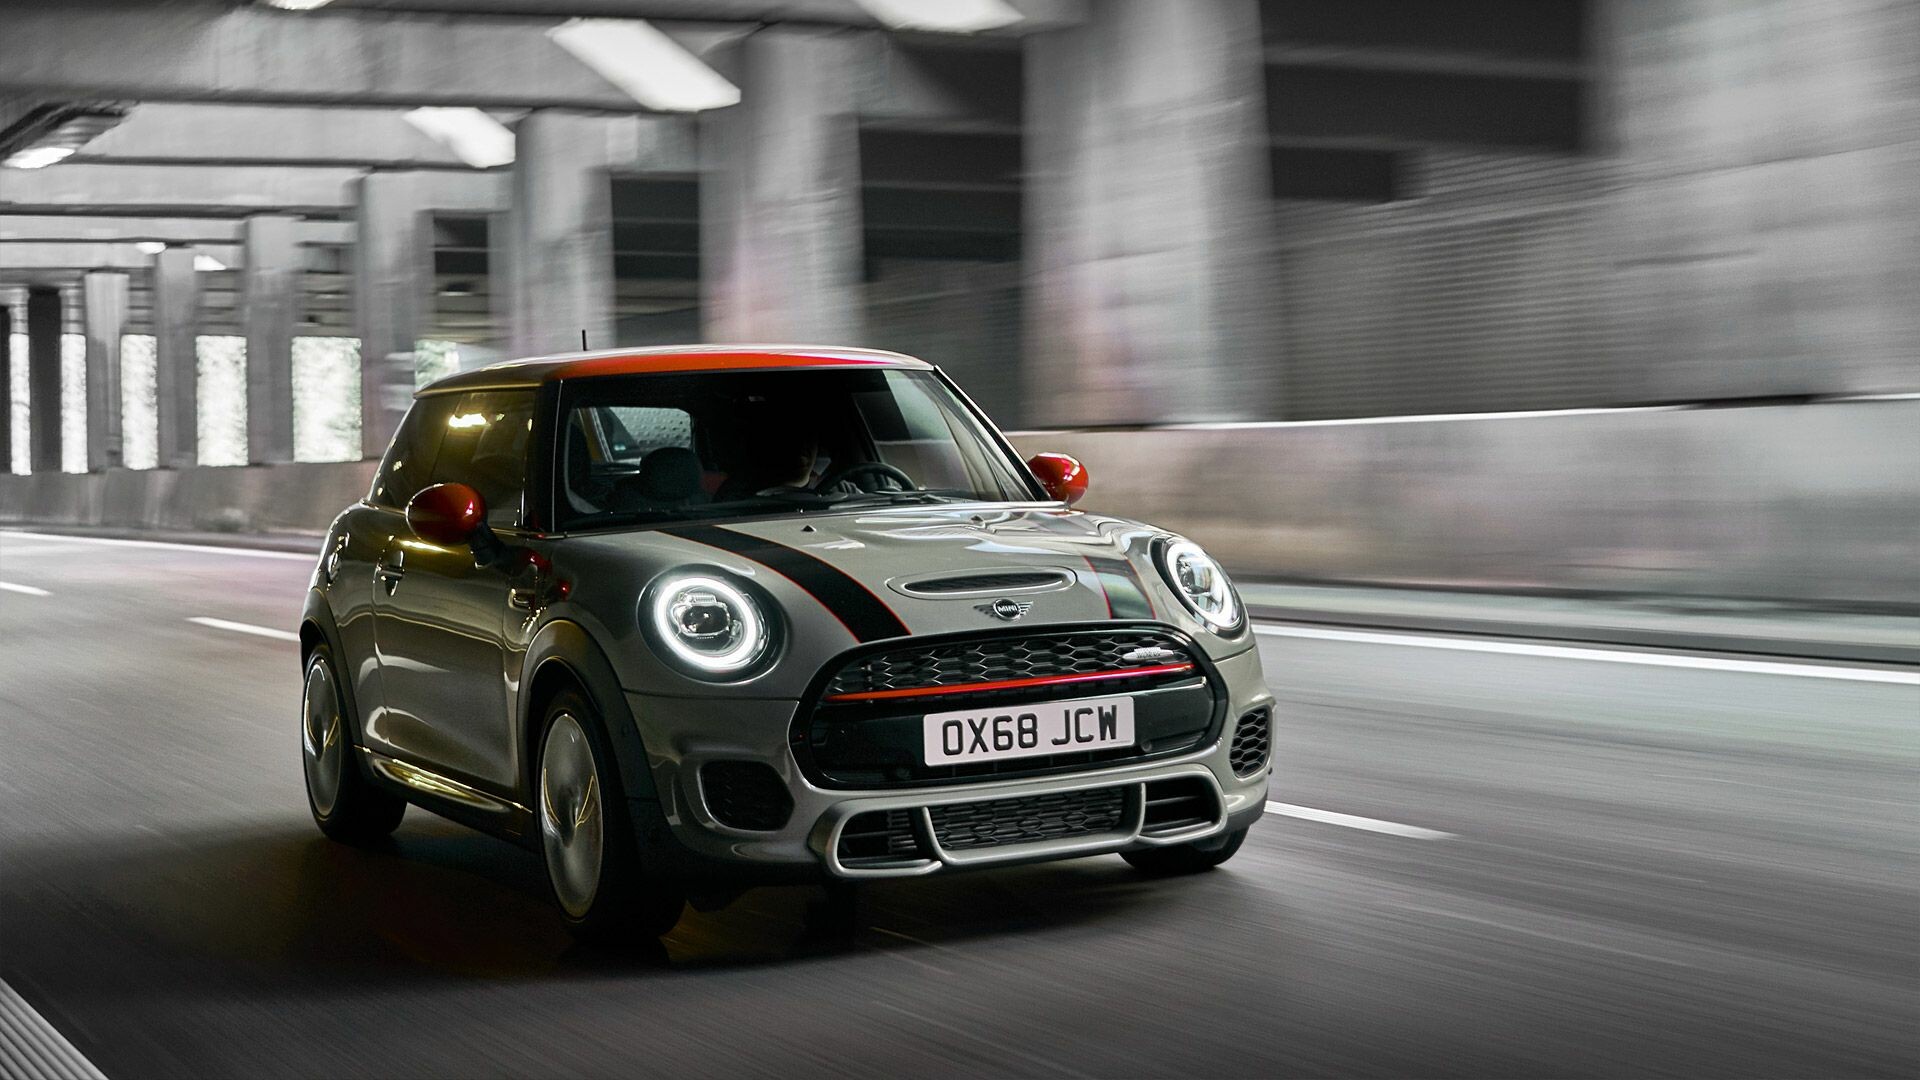 MINI Cooper: John Cooper Works, The third generation was unveiled by BMW in November 2013. 1920x1080 Full HD Background.